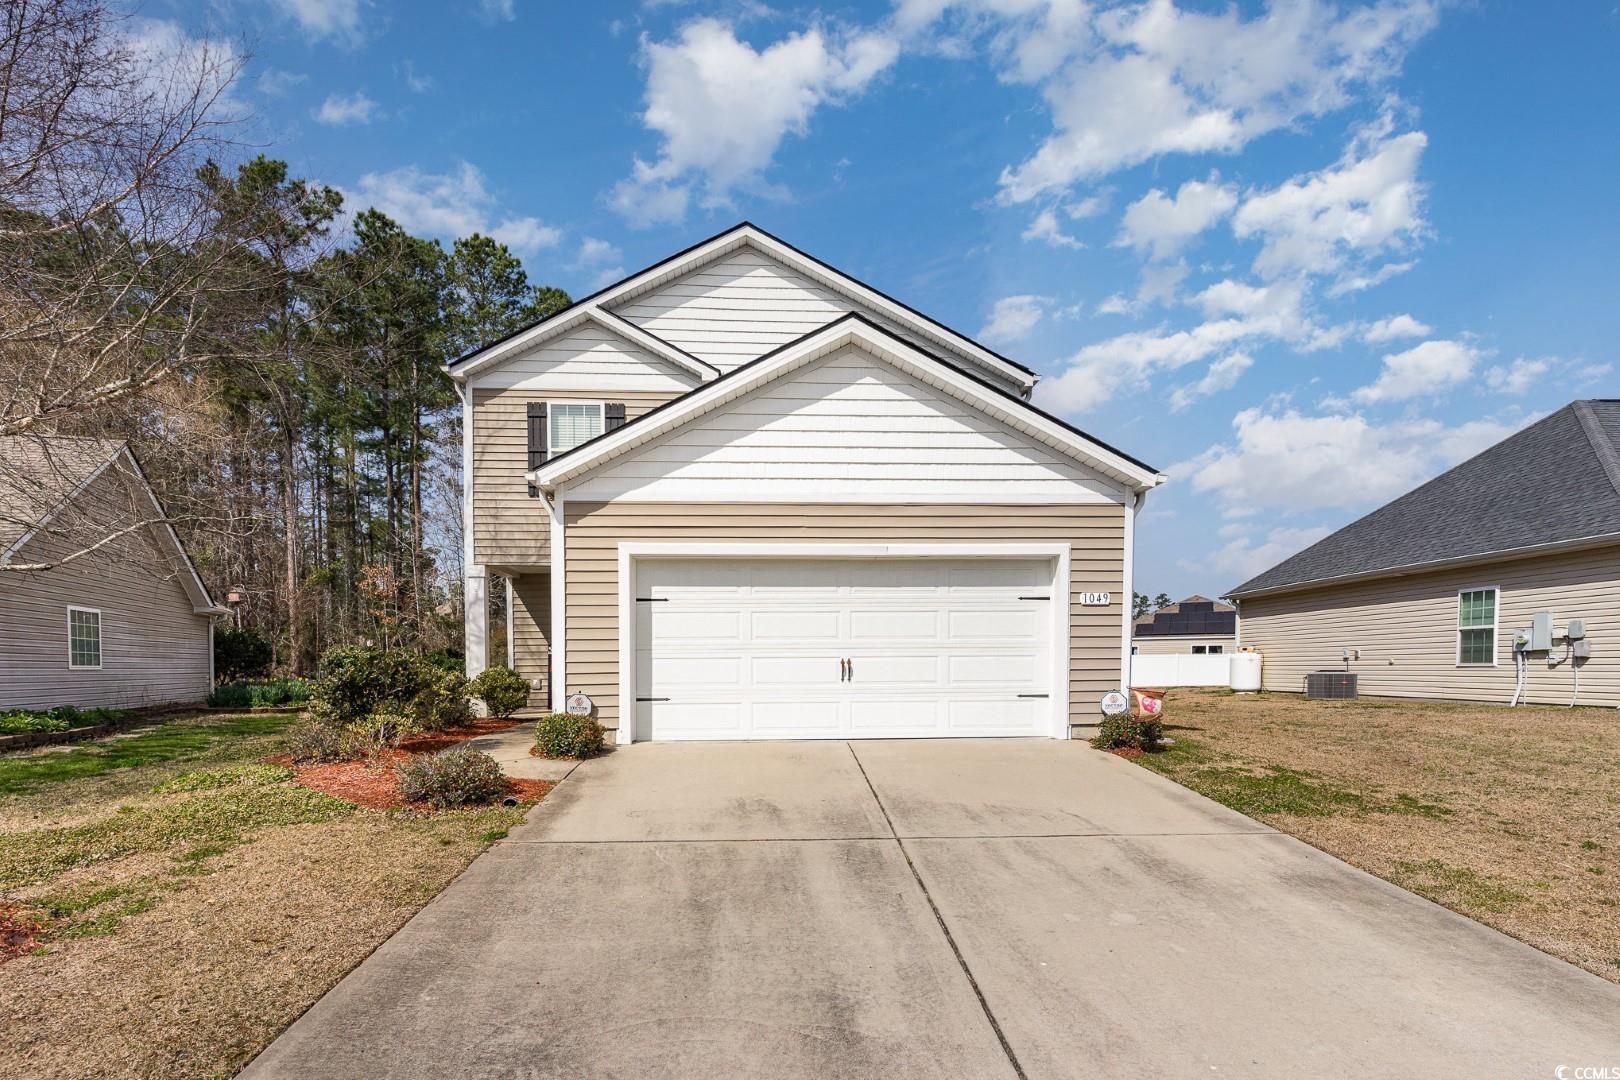 Photo one of 1049 Mccall Loop Conway SC 29526 | MLS 2405012